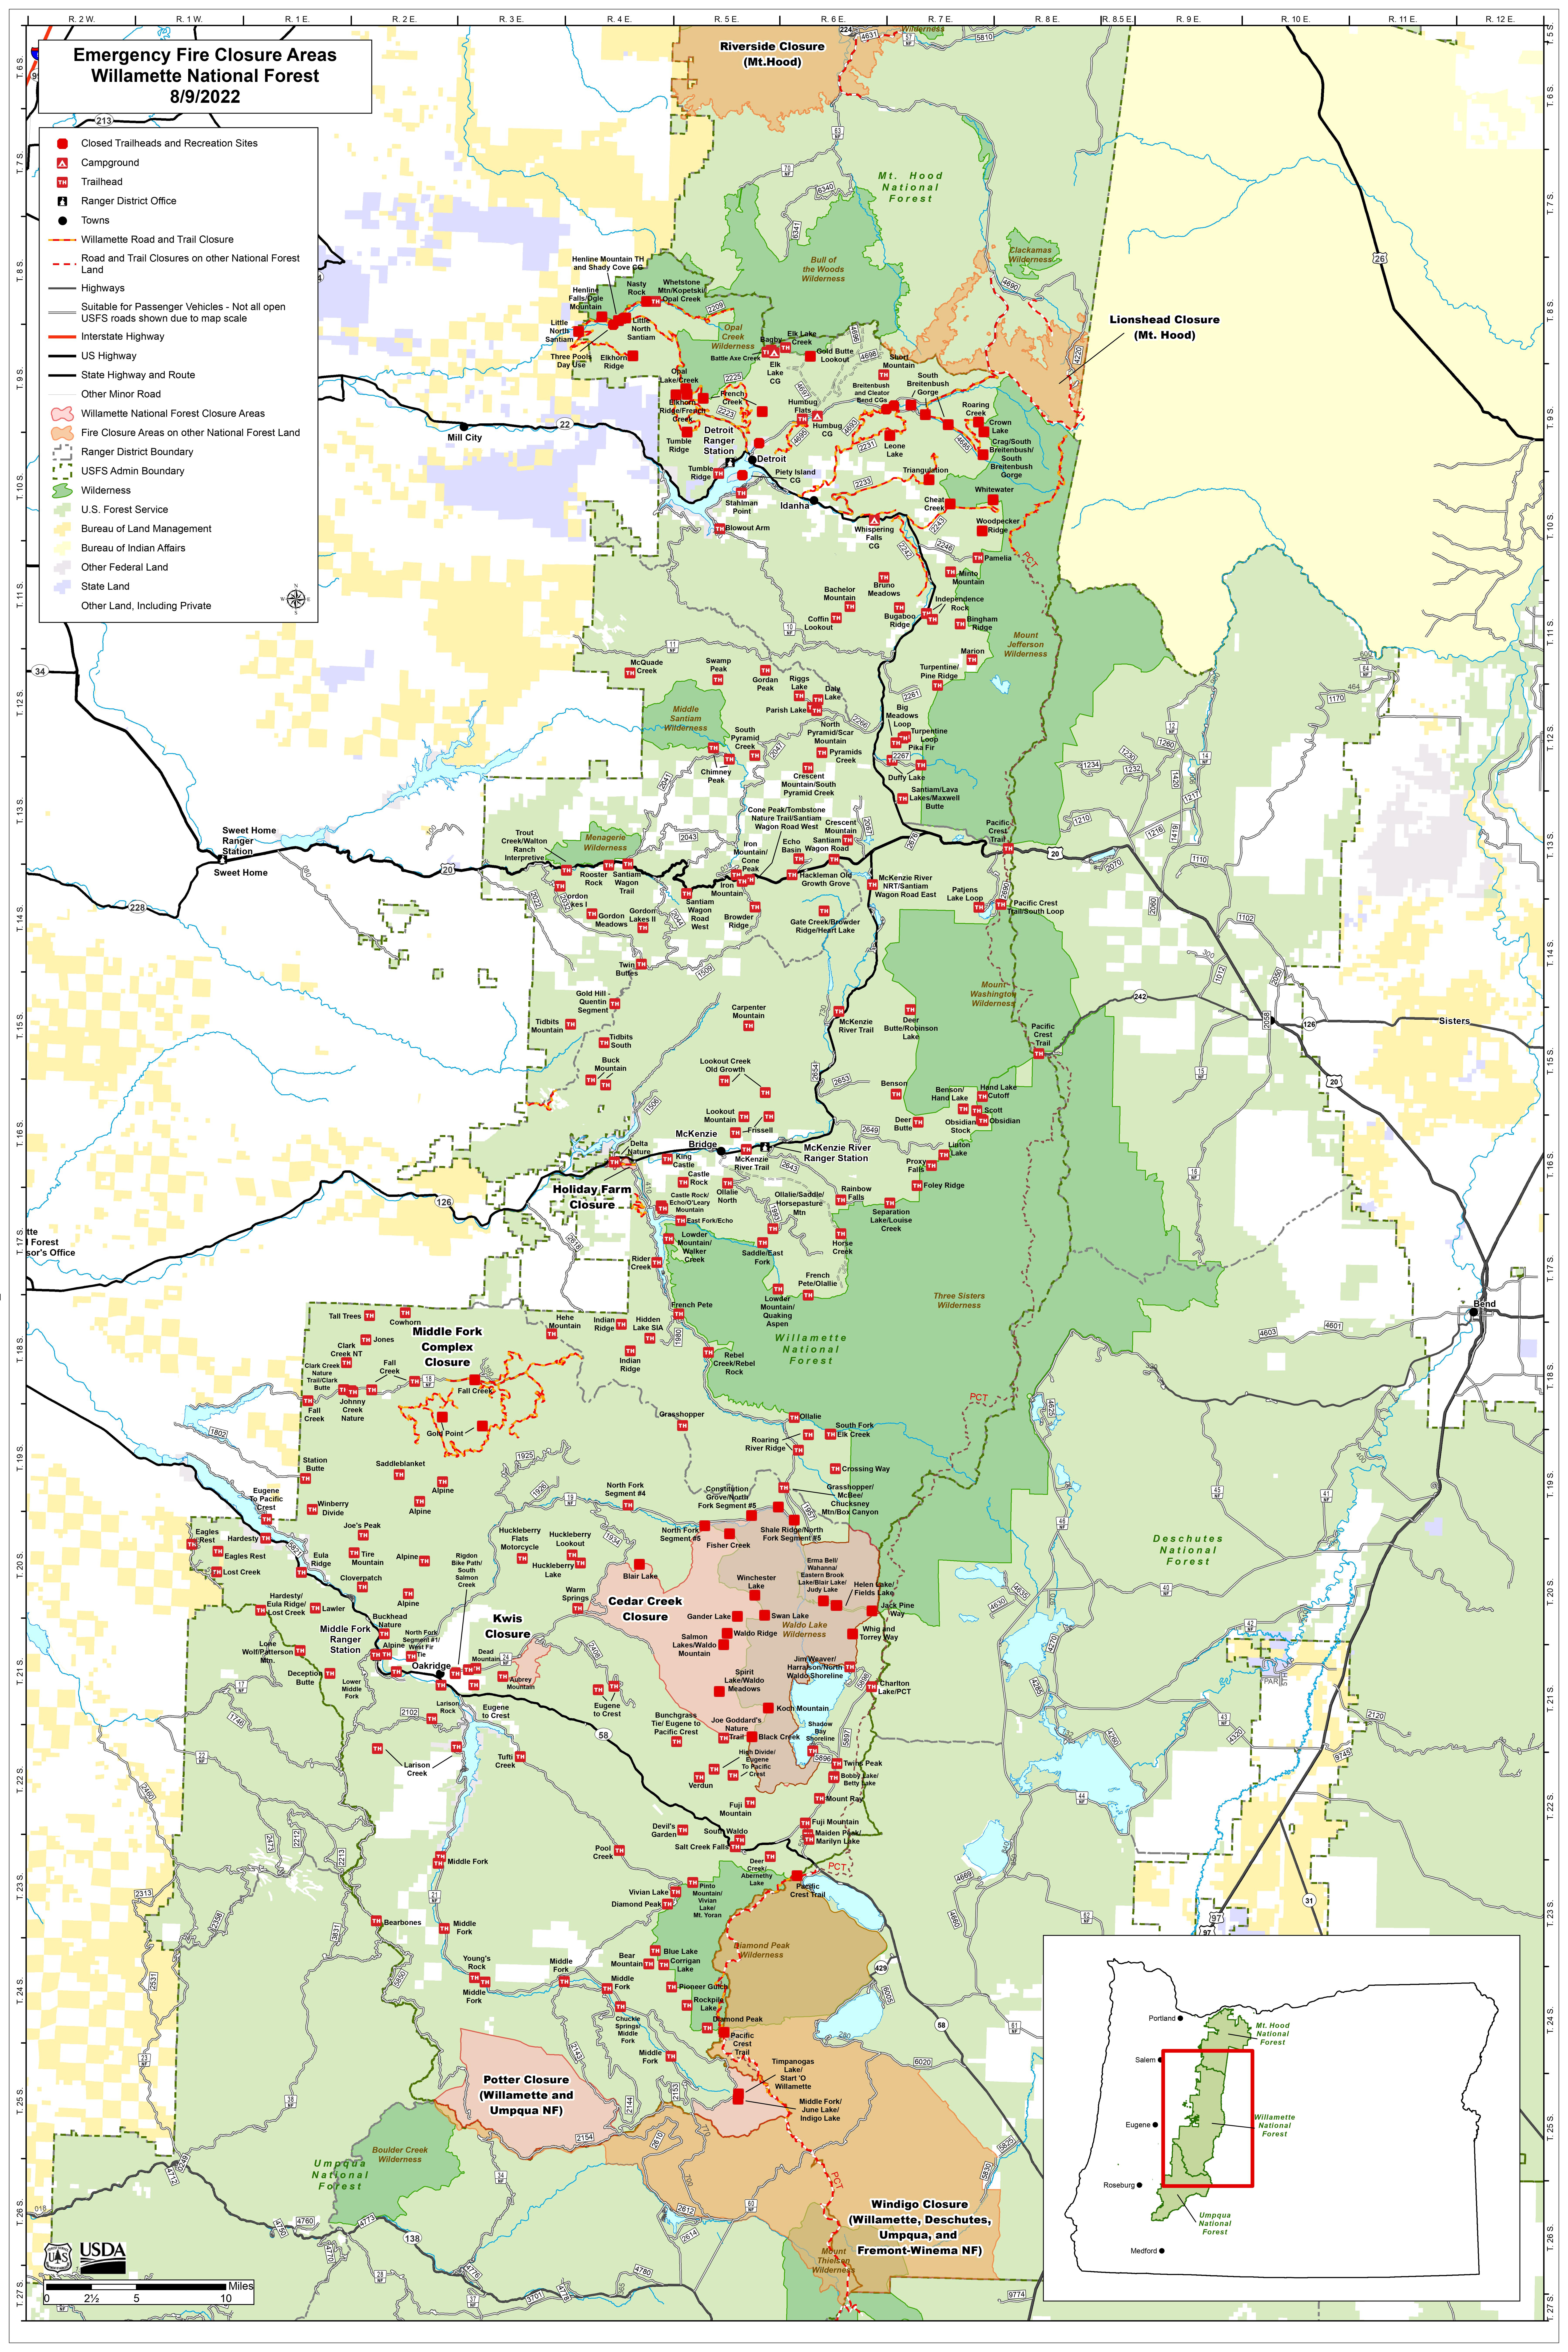 A map that shows all of the fire-related closure areas on the Willamette National Forest